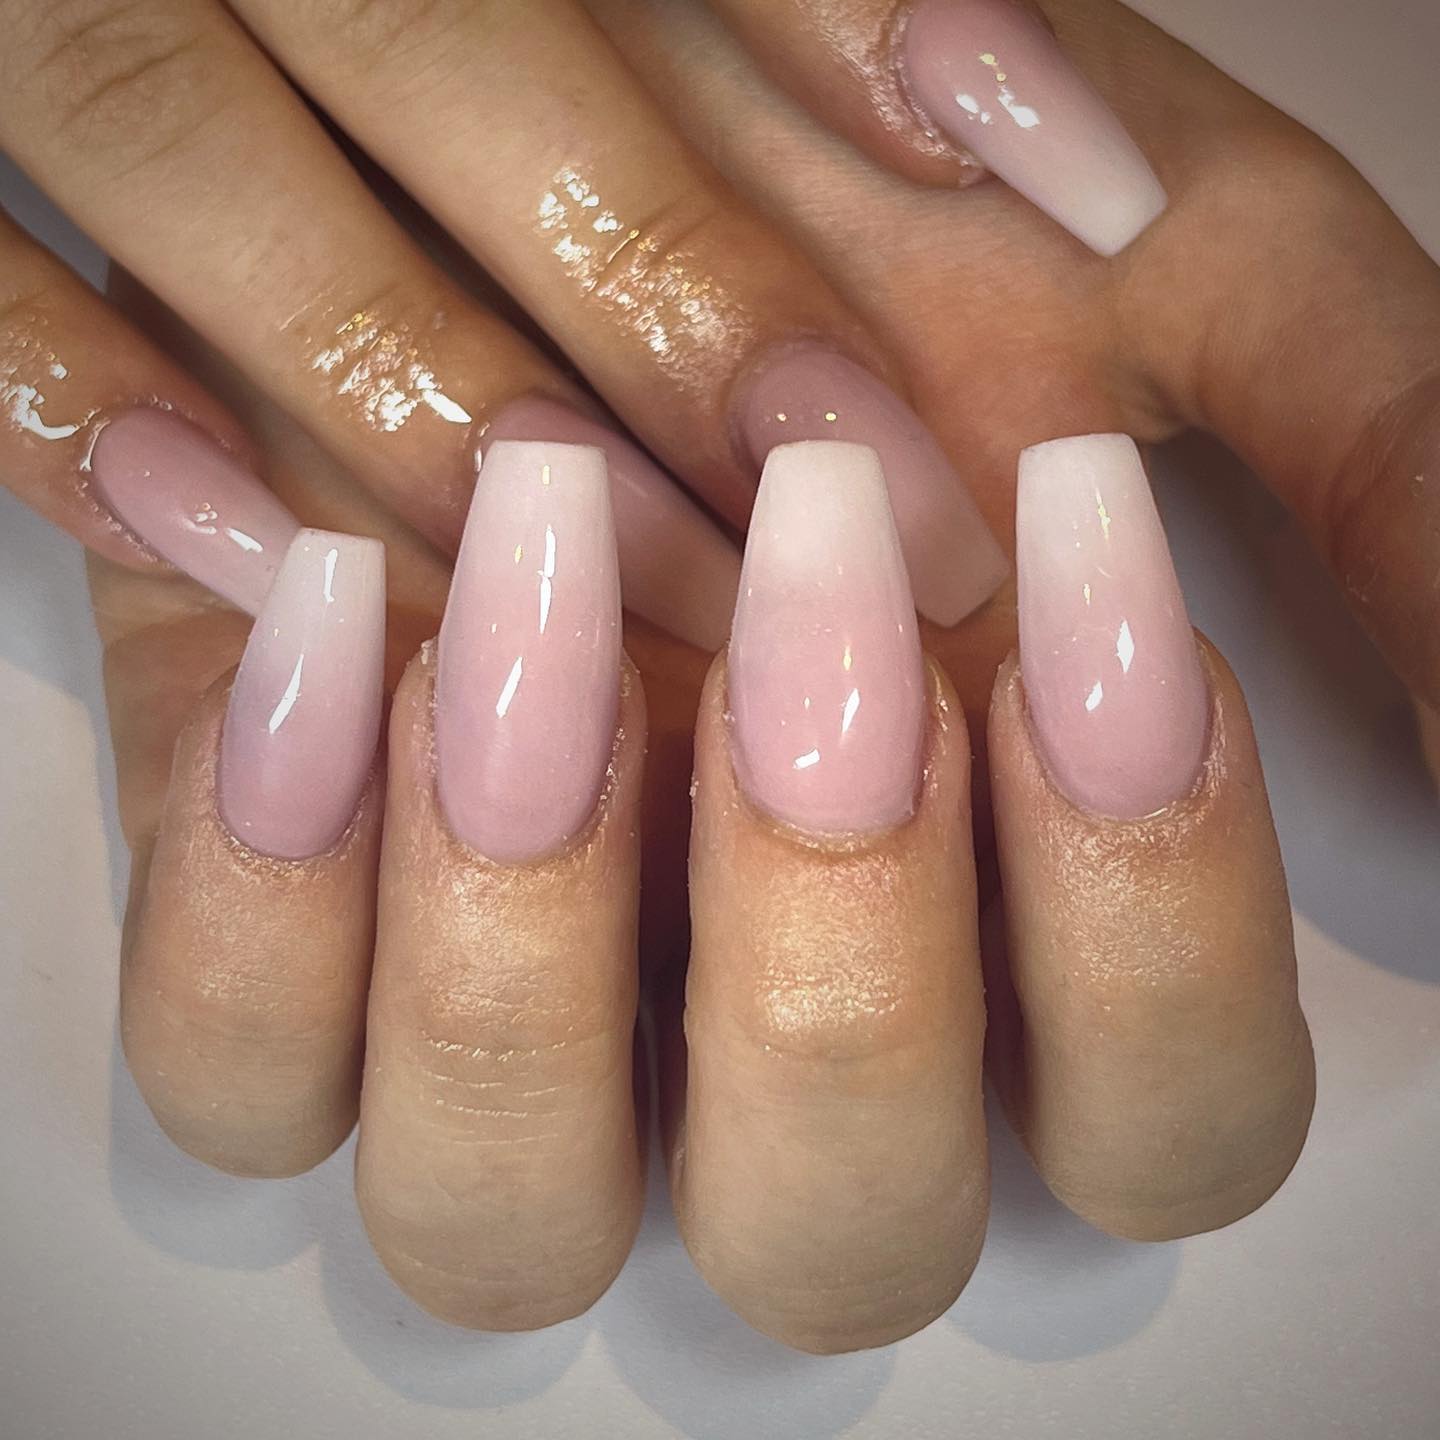 Sometimes all you need is simplicity. In this look, a sharp transition is not used between pink and white. Instead of that, a nude shade is combined with the soft pink nail polish.